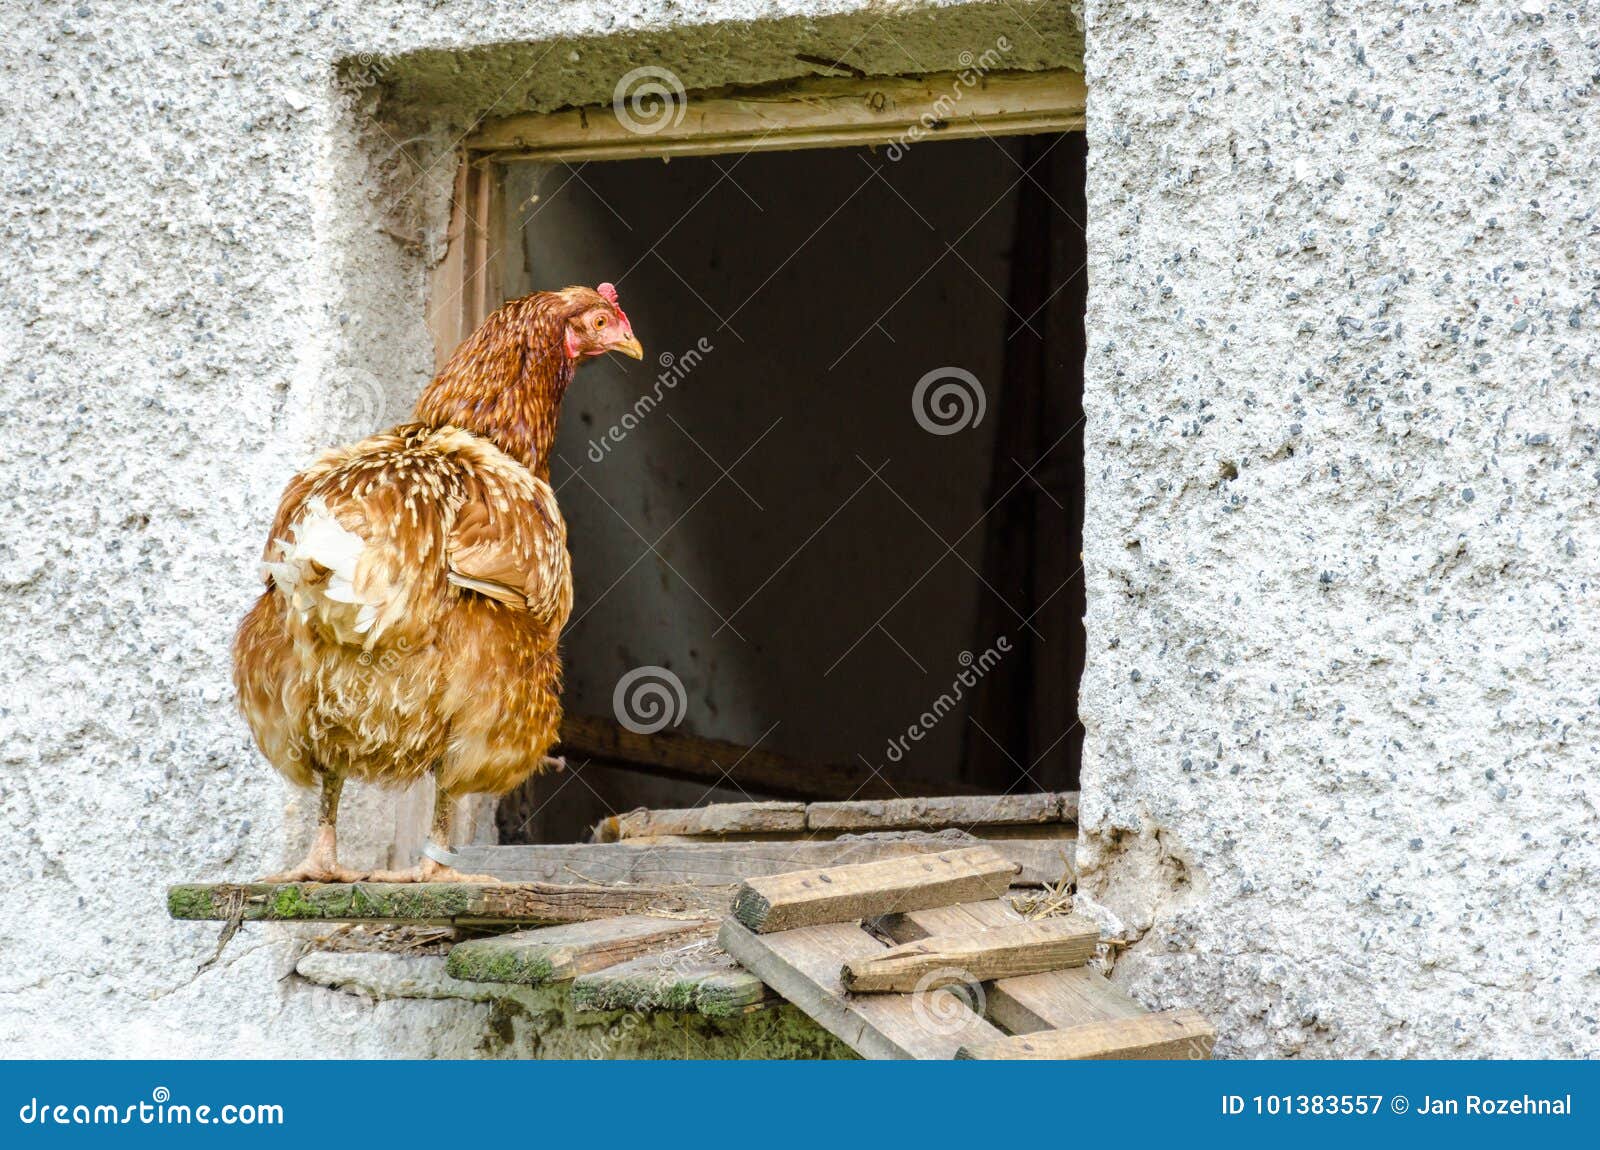 Hens leaving their coop stock image. Image of henhouse ...